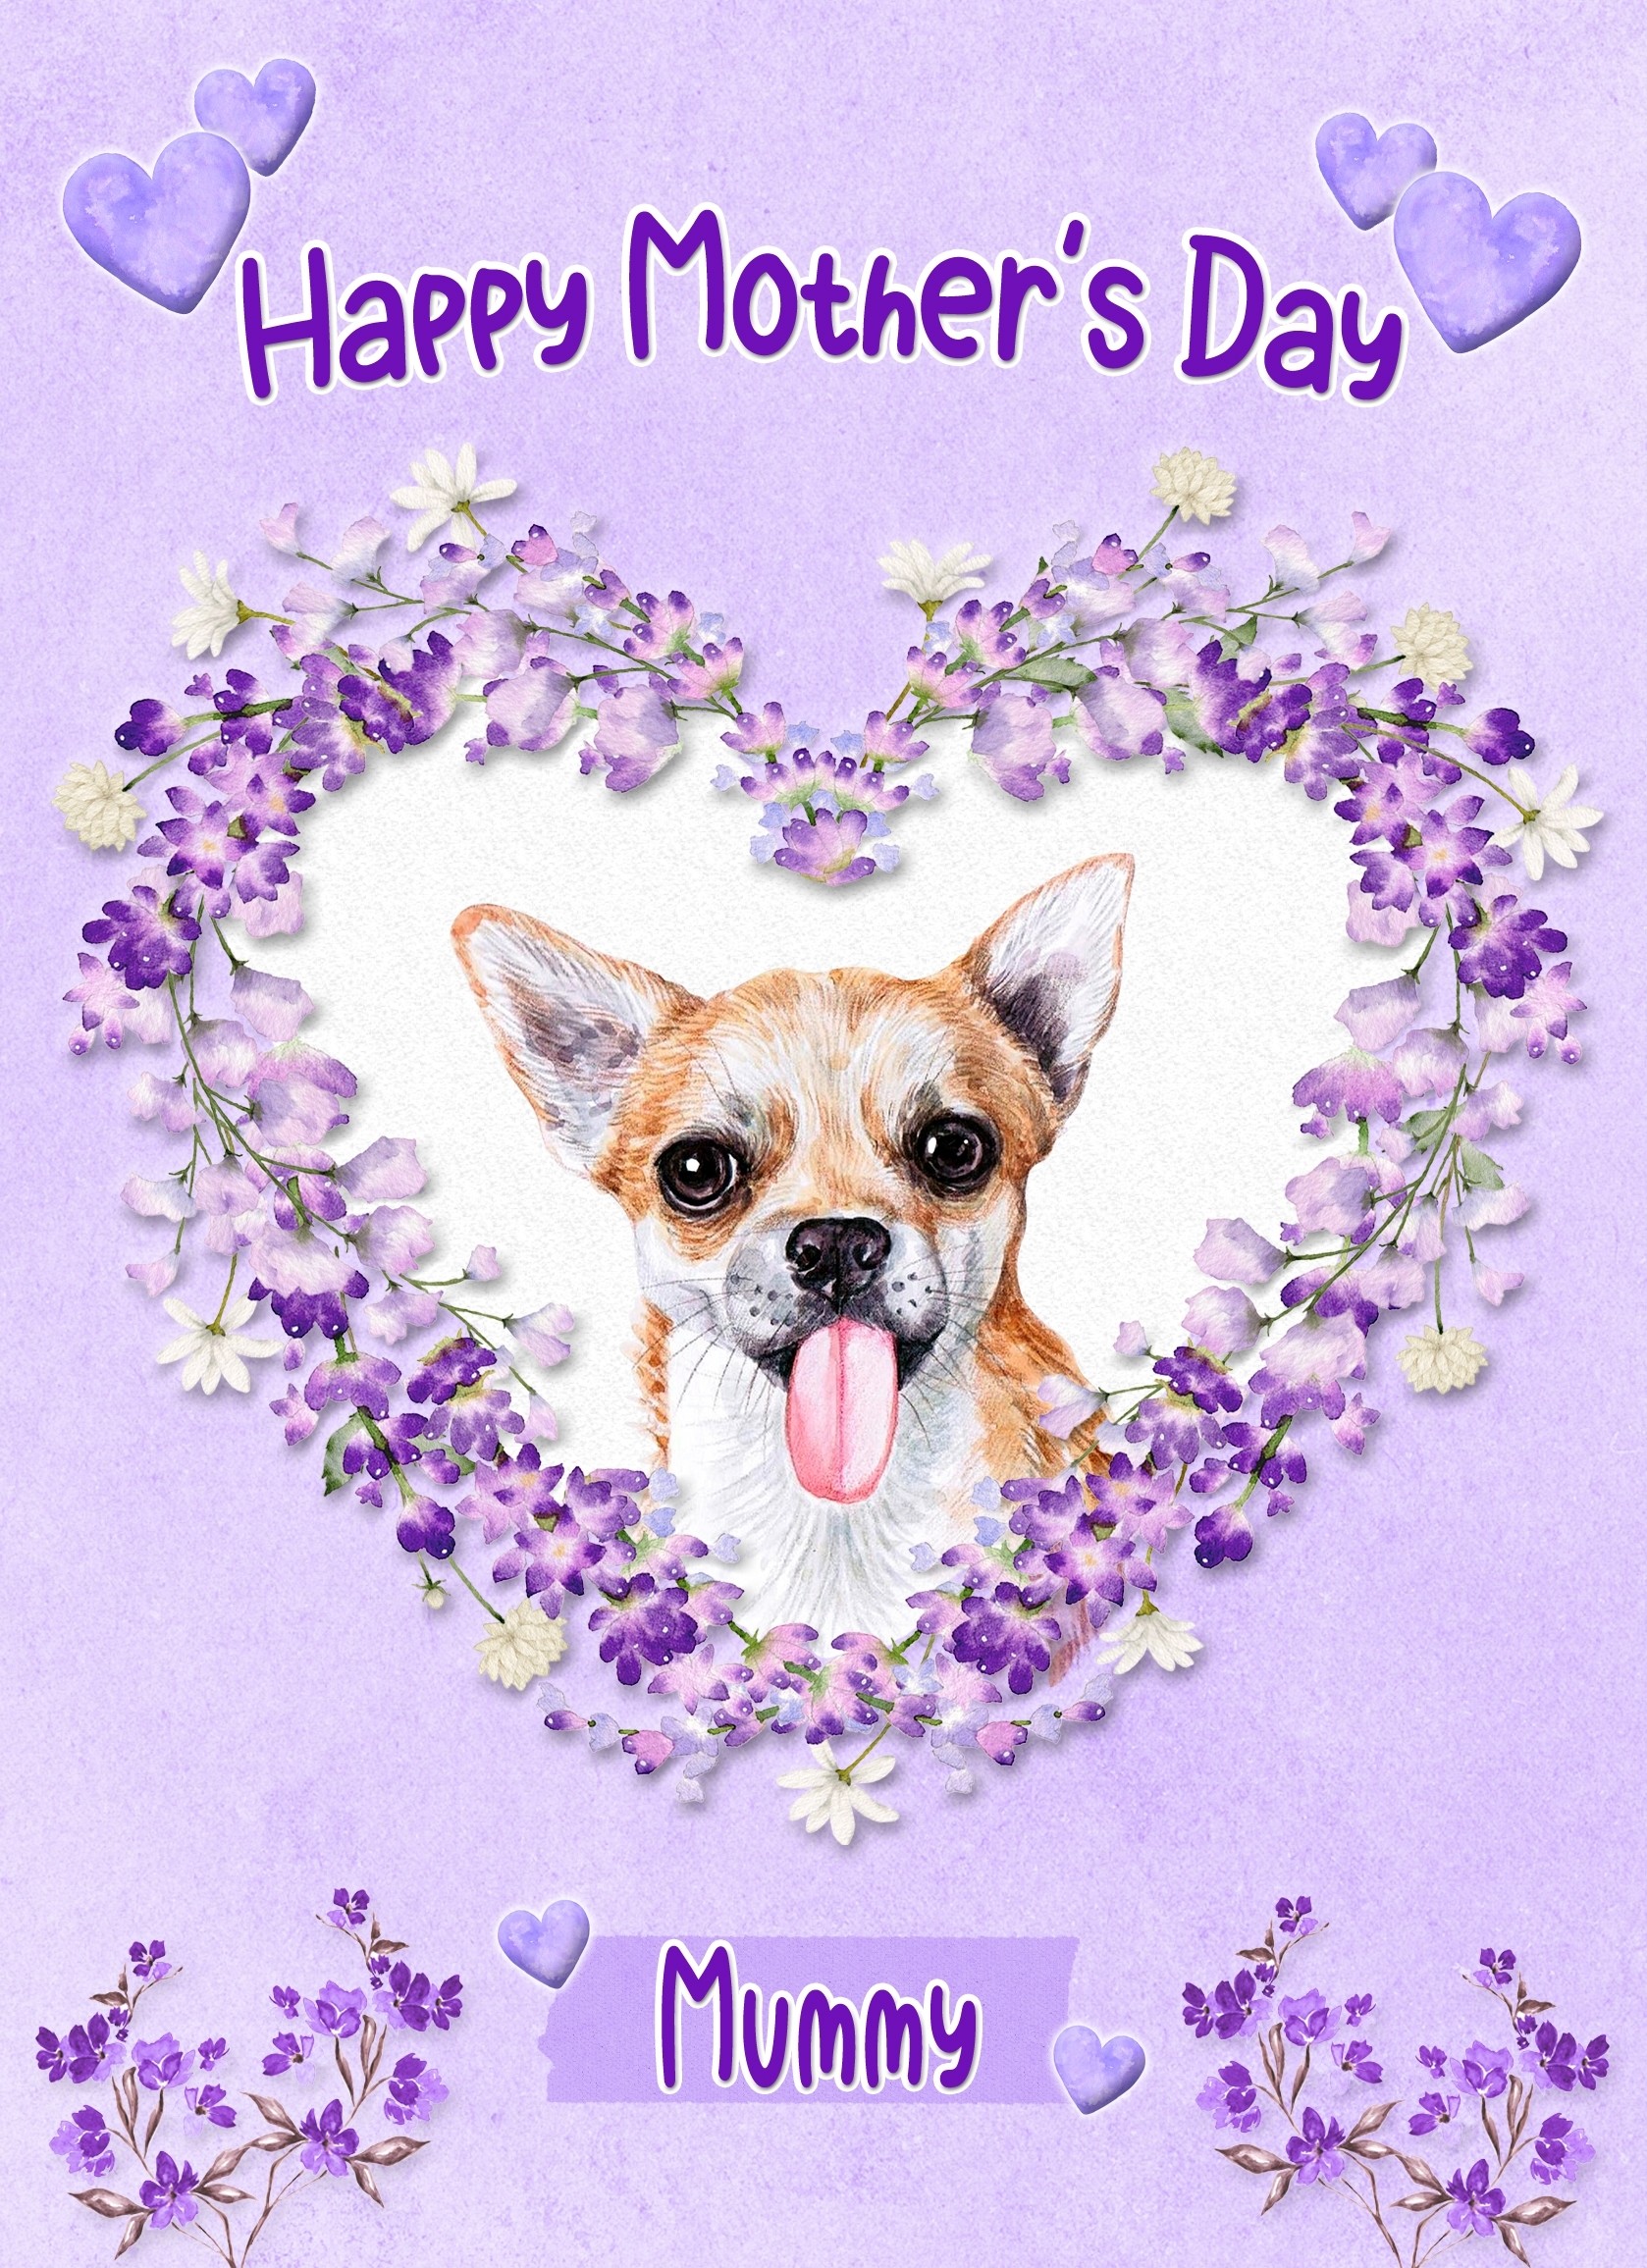 Chihuahua Dog Mothers Day Card (Happy Mothers, Mummy)